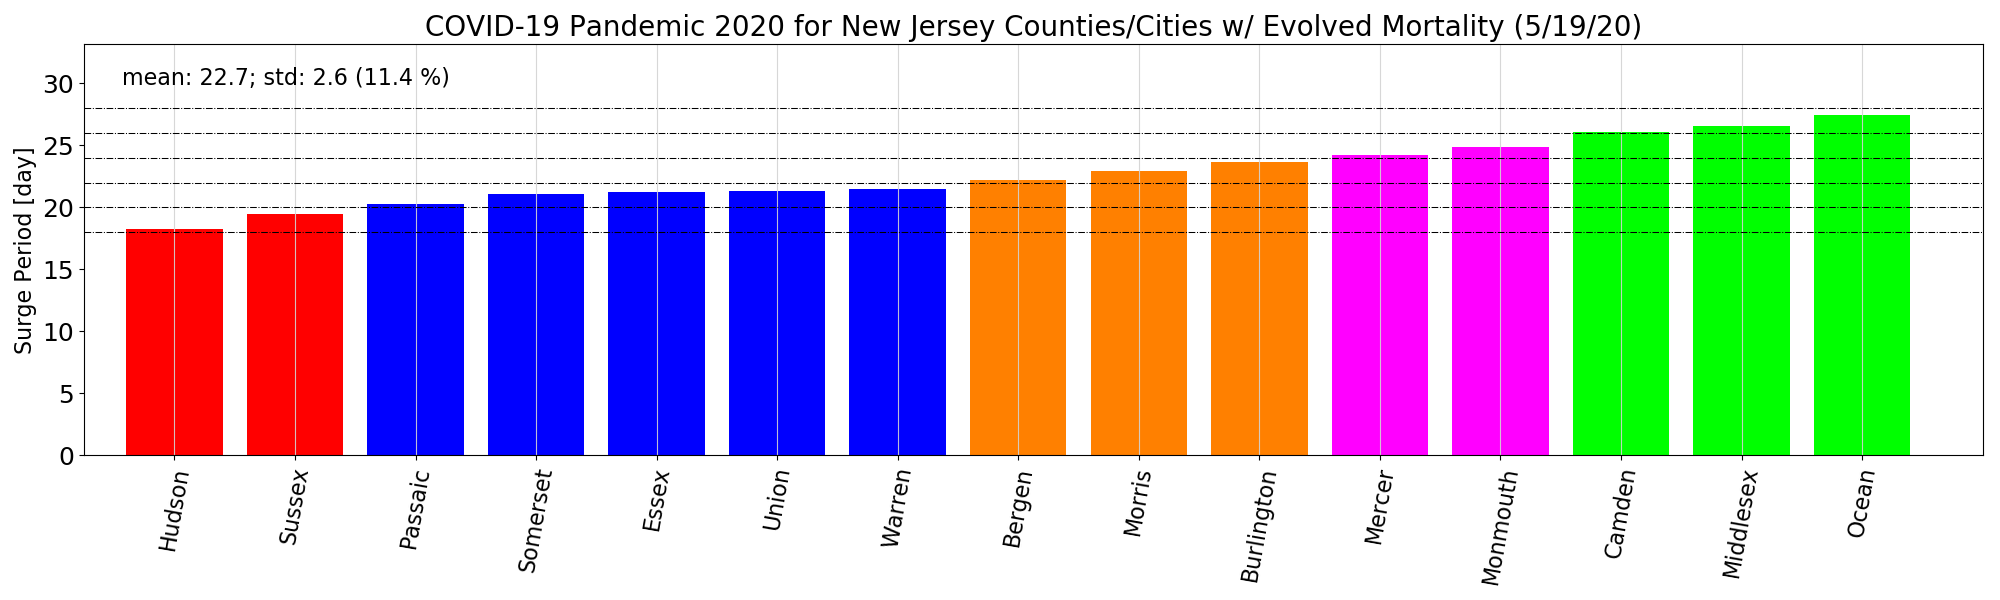 group_surge_periods_us_new_jersey.png